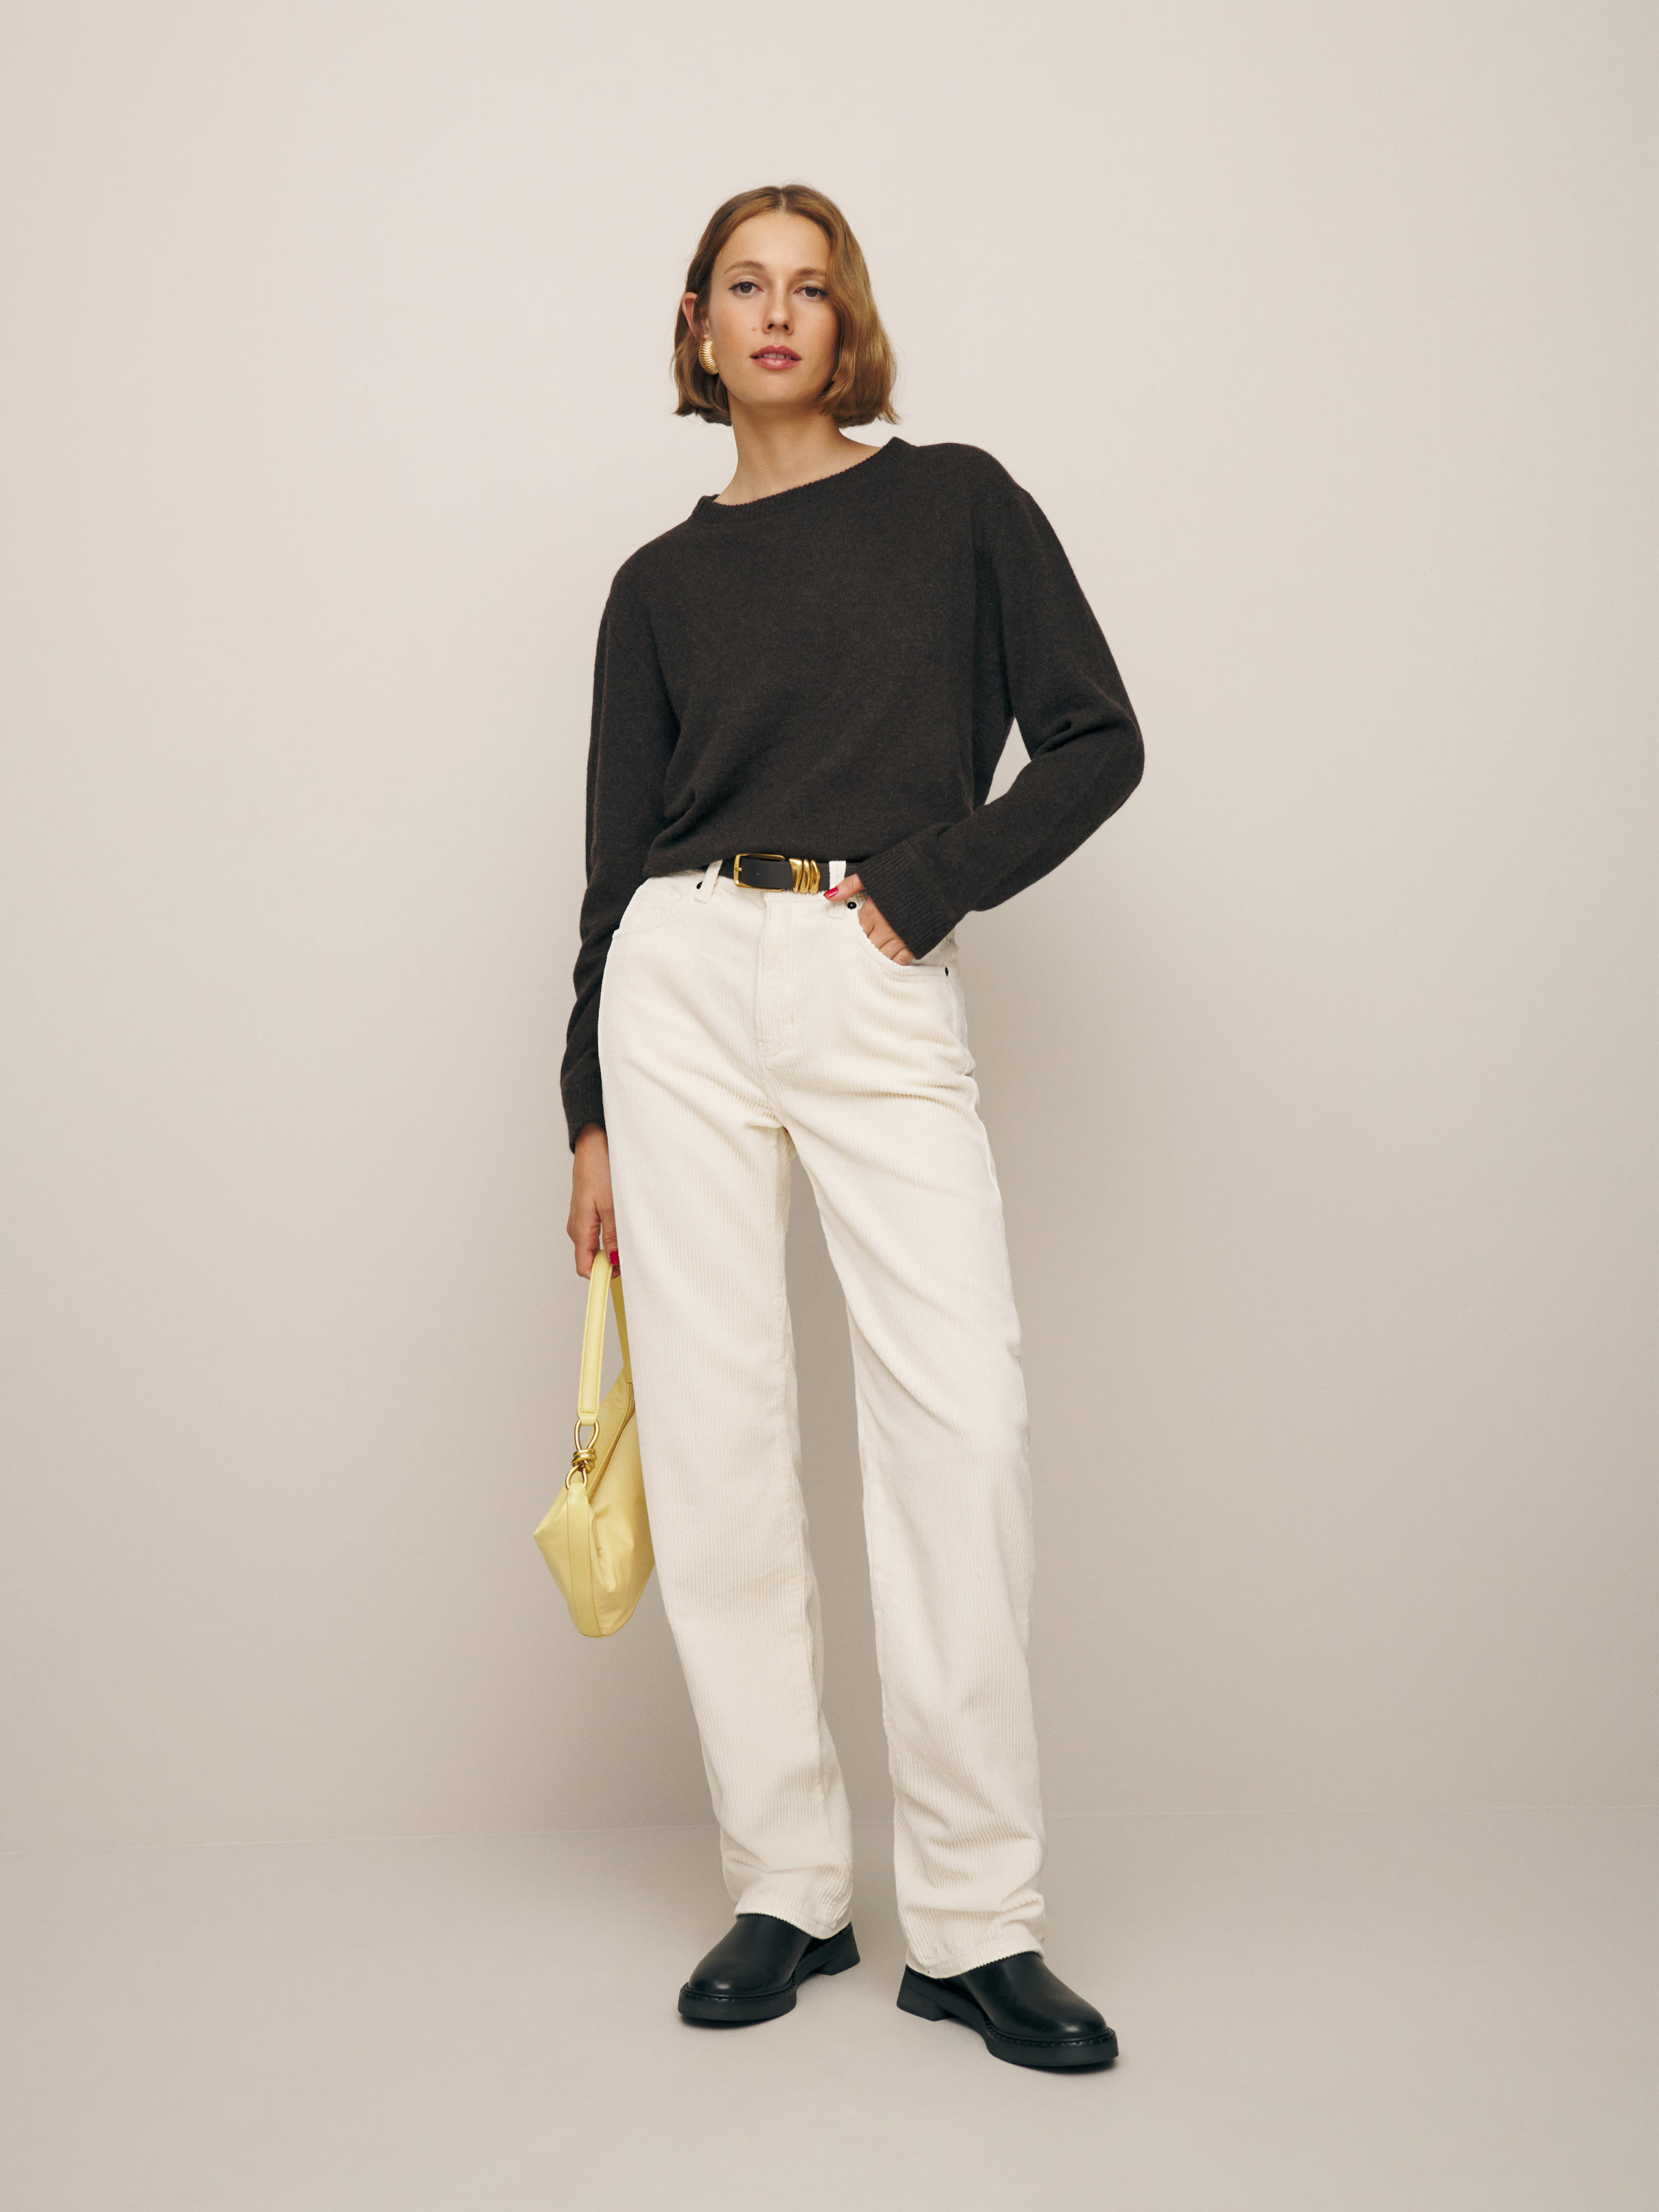 Reformation Val 90s Mid Rise Straight Corduroy Pant In Fior Di Latte